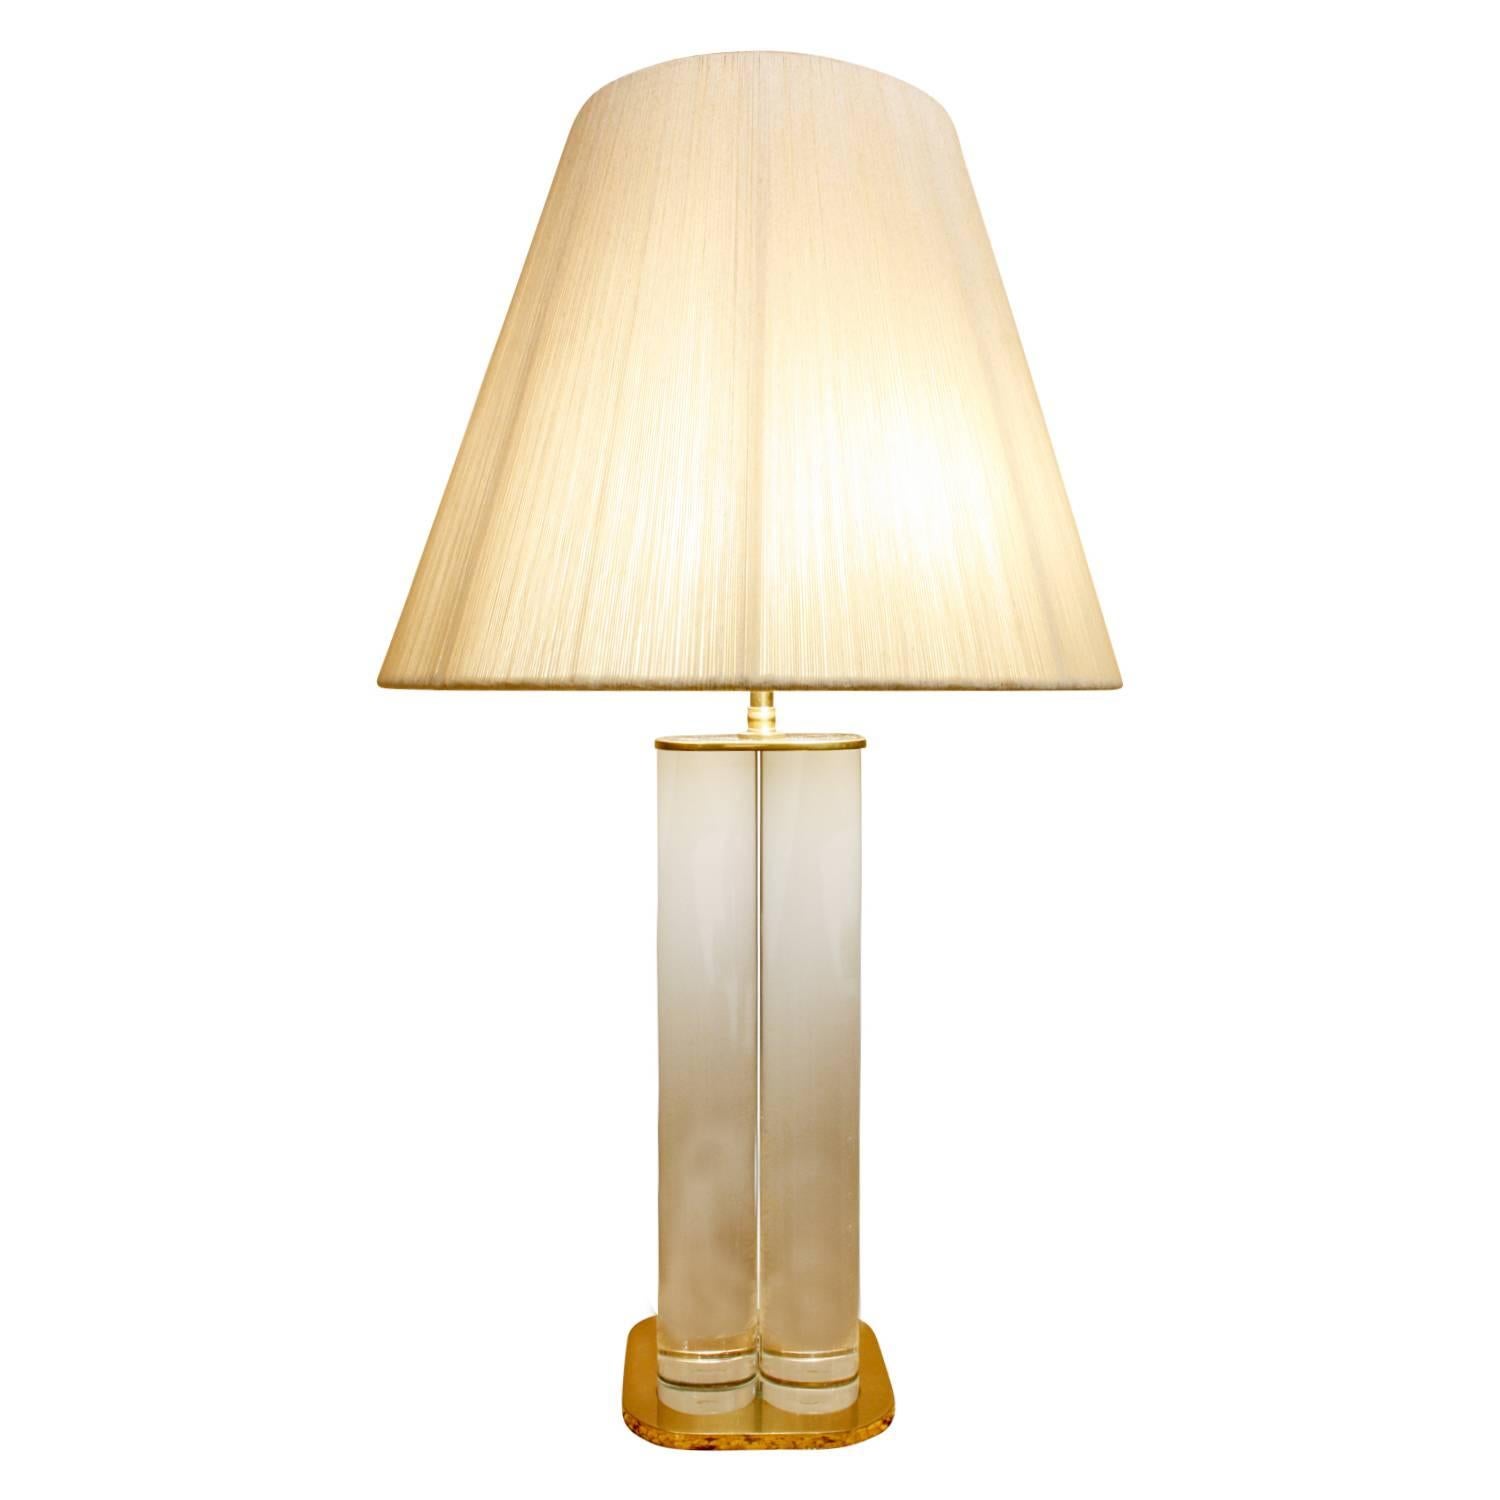 Hand-Crafted Pair of Chic Table Lamps with Solid Lucite Rods, 1970s